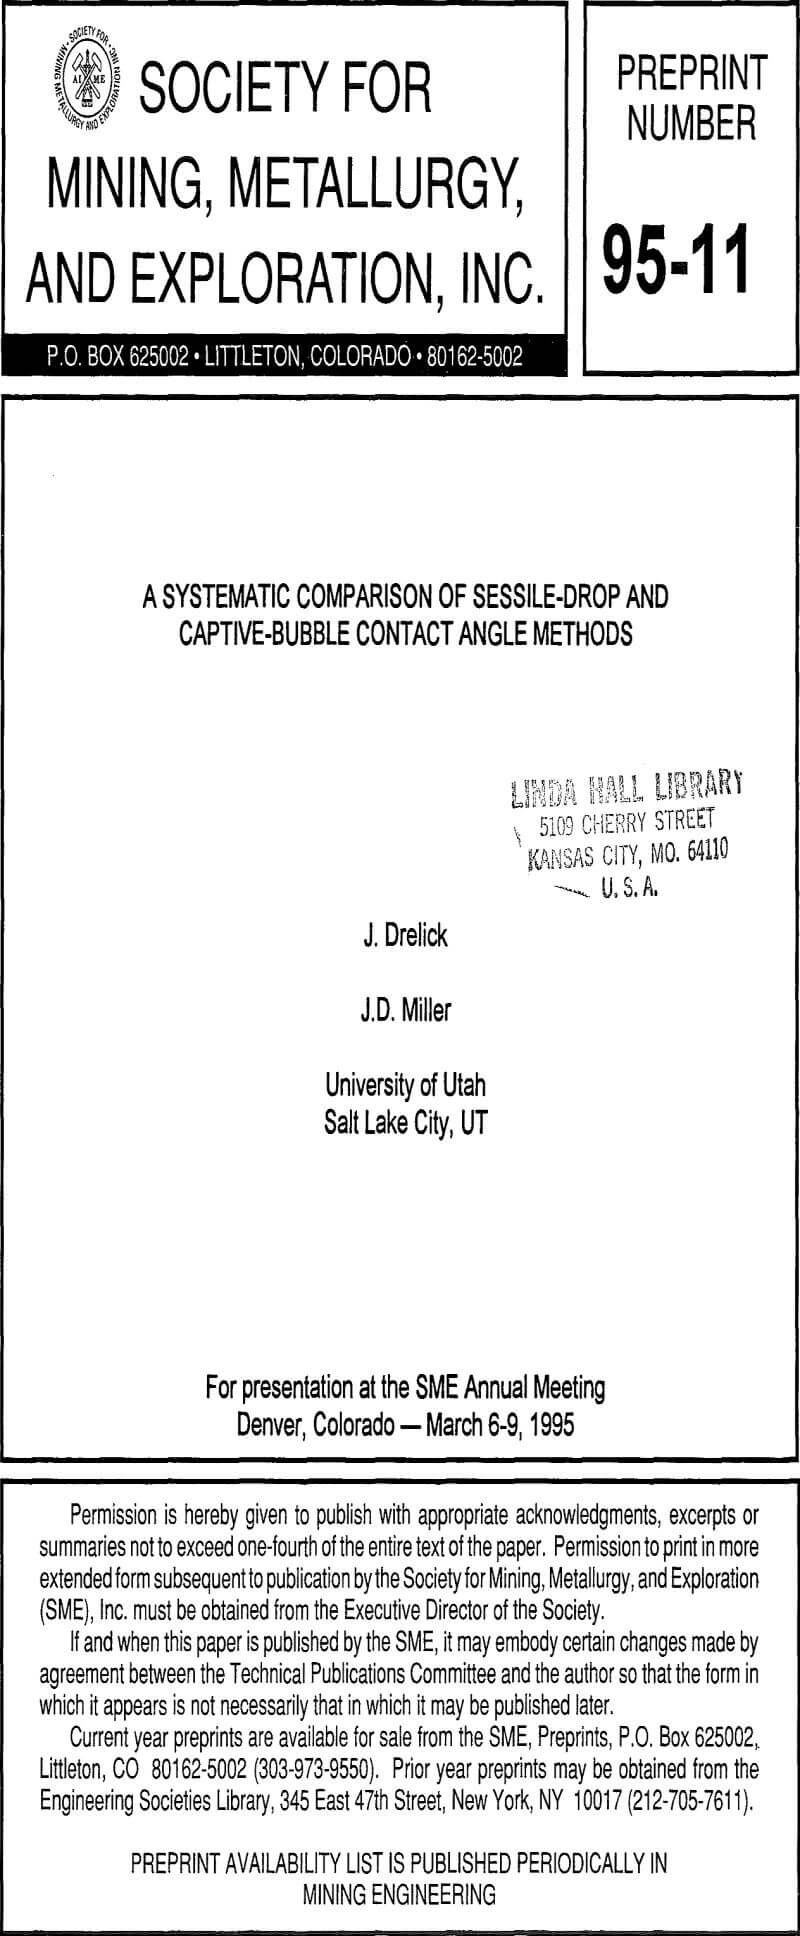 a systematic comparison of sessile-drop and captive-bubble contact angle methods